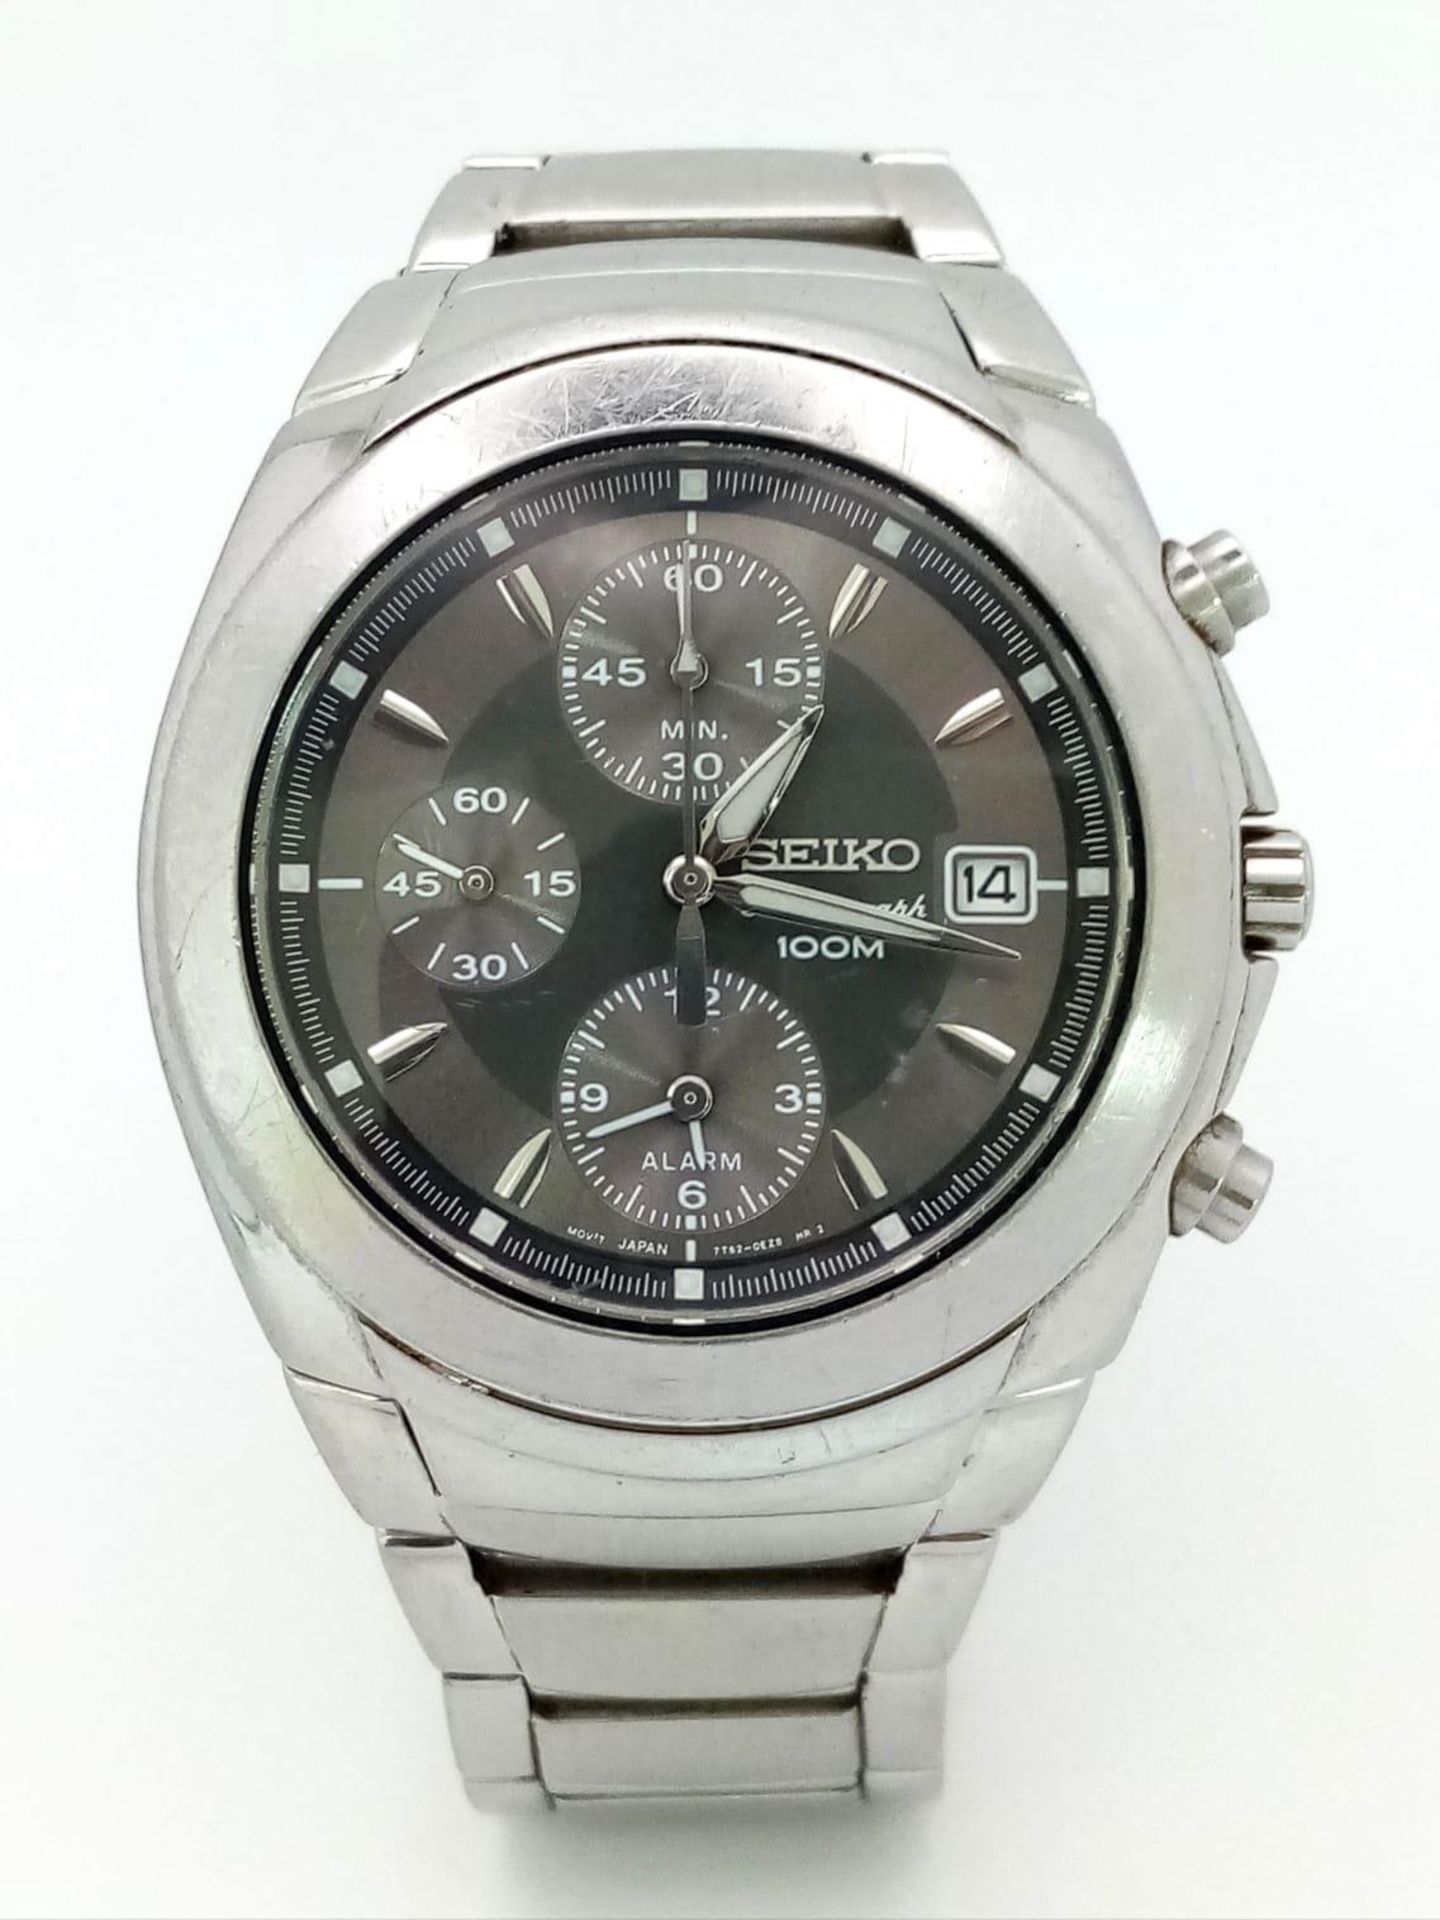 A Seiko Chronograph Quartz Gens Watch. Stainless steel strap and case - 40mm. Silver tone dial - Image 2 of 13